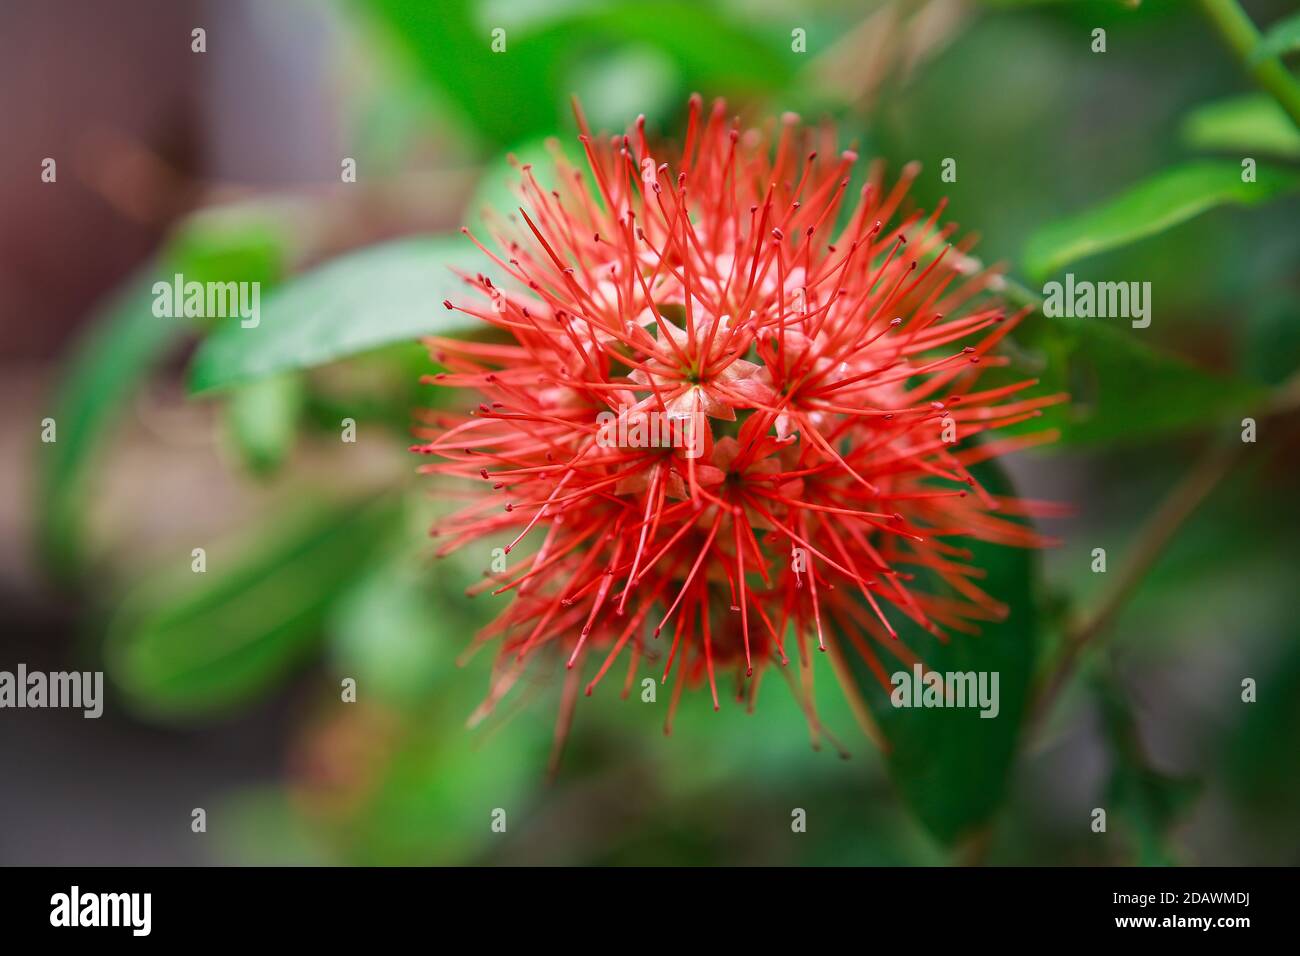 Beautiful  Combretum constrictum on background blurred Stock Photo